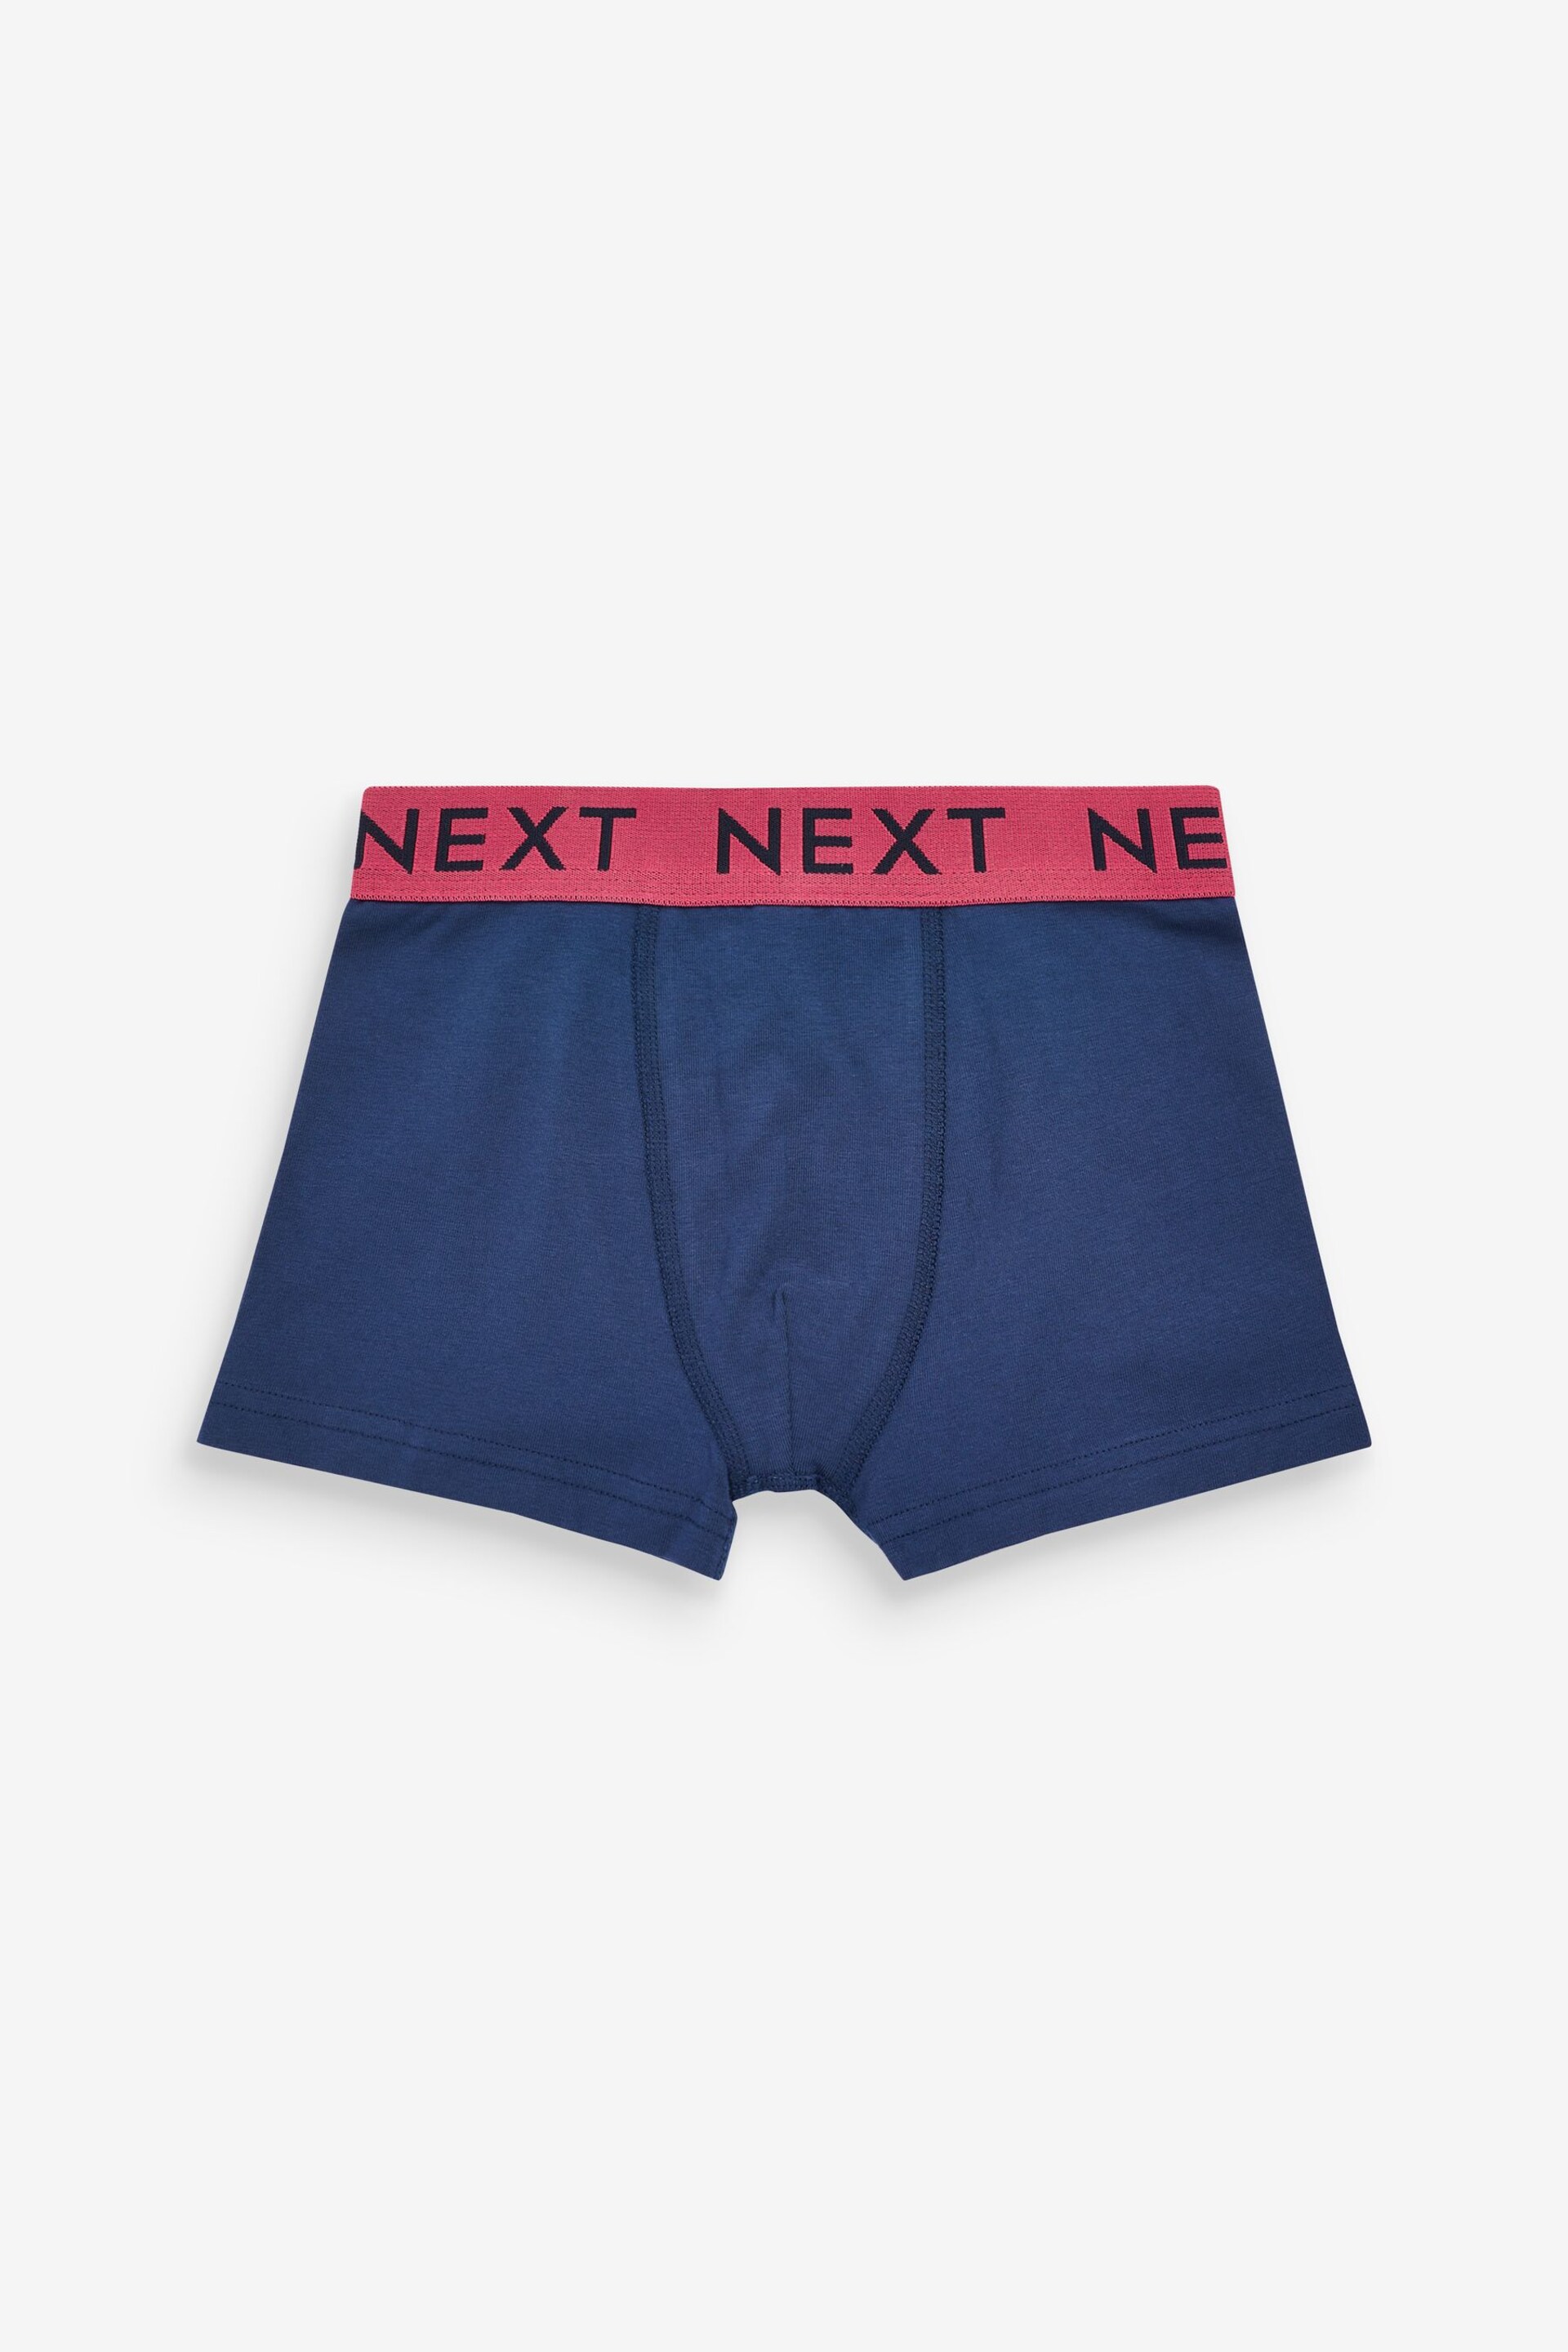 Navy Bright Waistband Trunks 10 Pack (1.5-16yrs) - Image 4 of 11